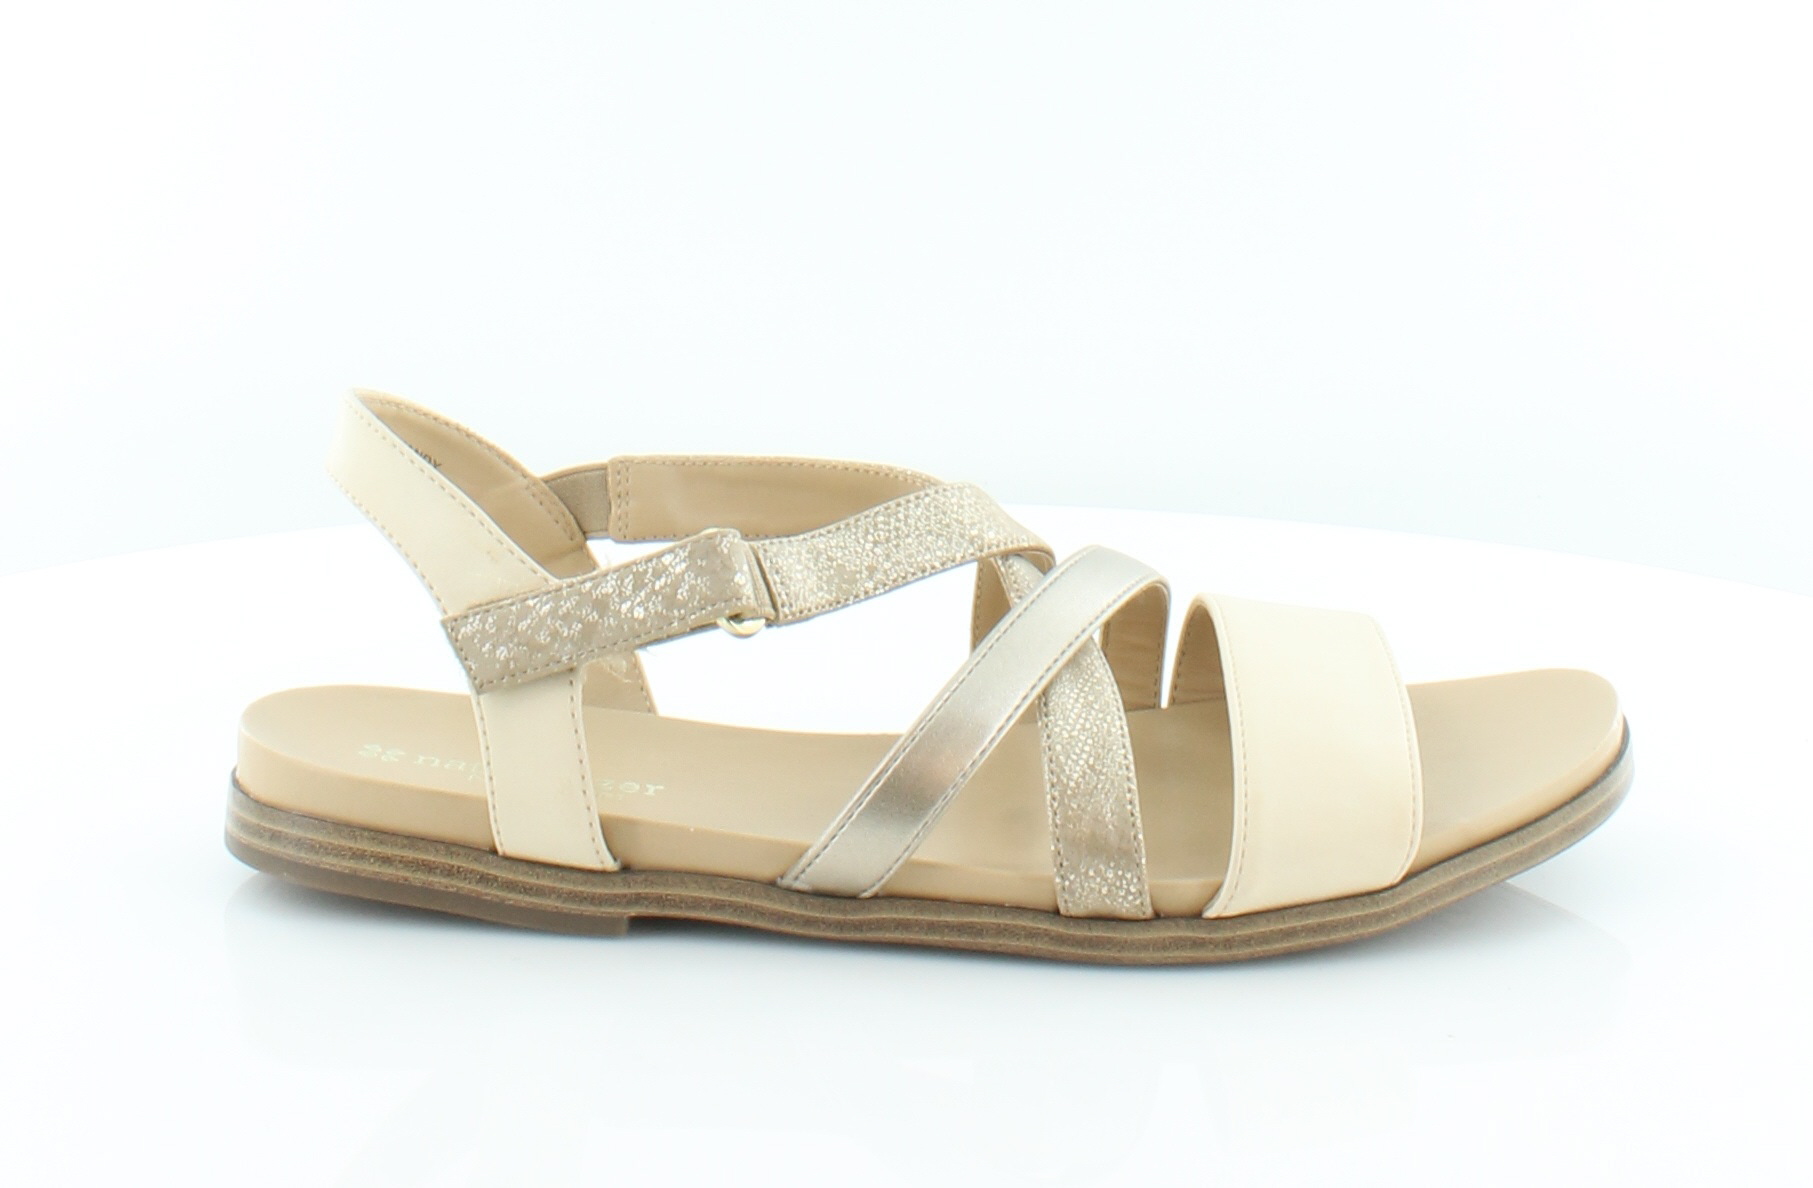 Naturalizer Kandy Beige Womens Shoes Size 10 M Sandals MSRP $59 ...